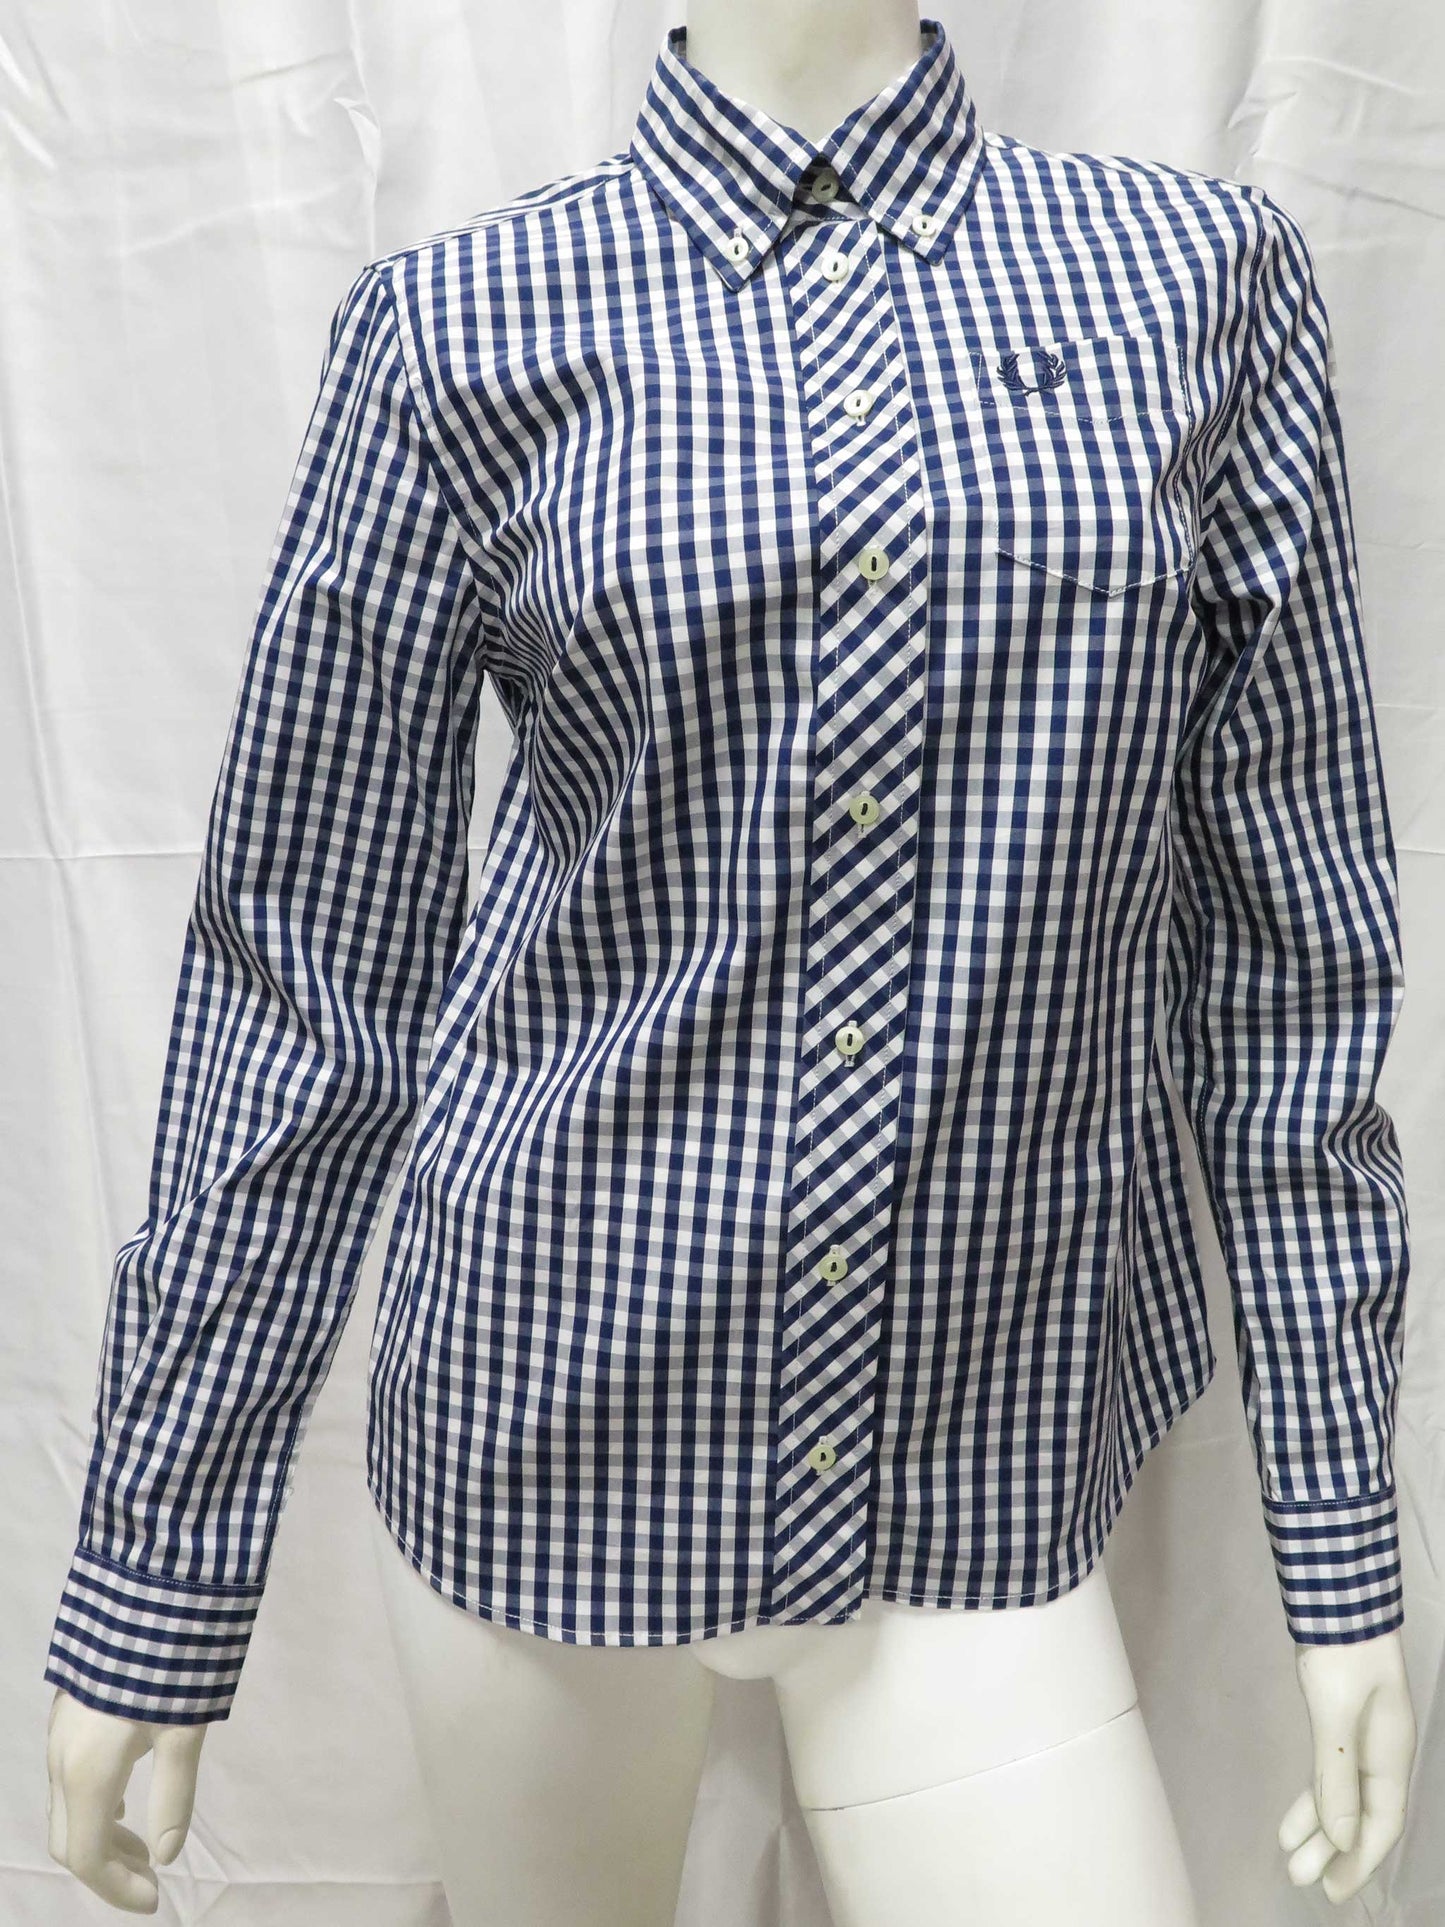 L/S Gingham Woven Shirt (French Navy)